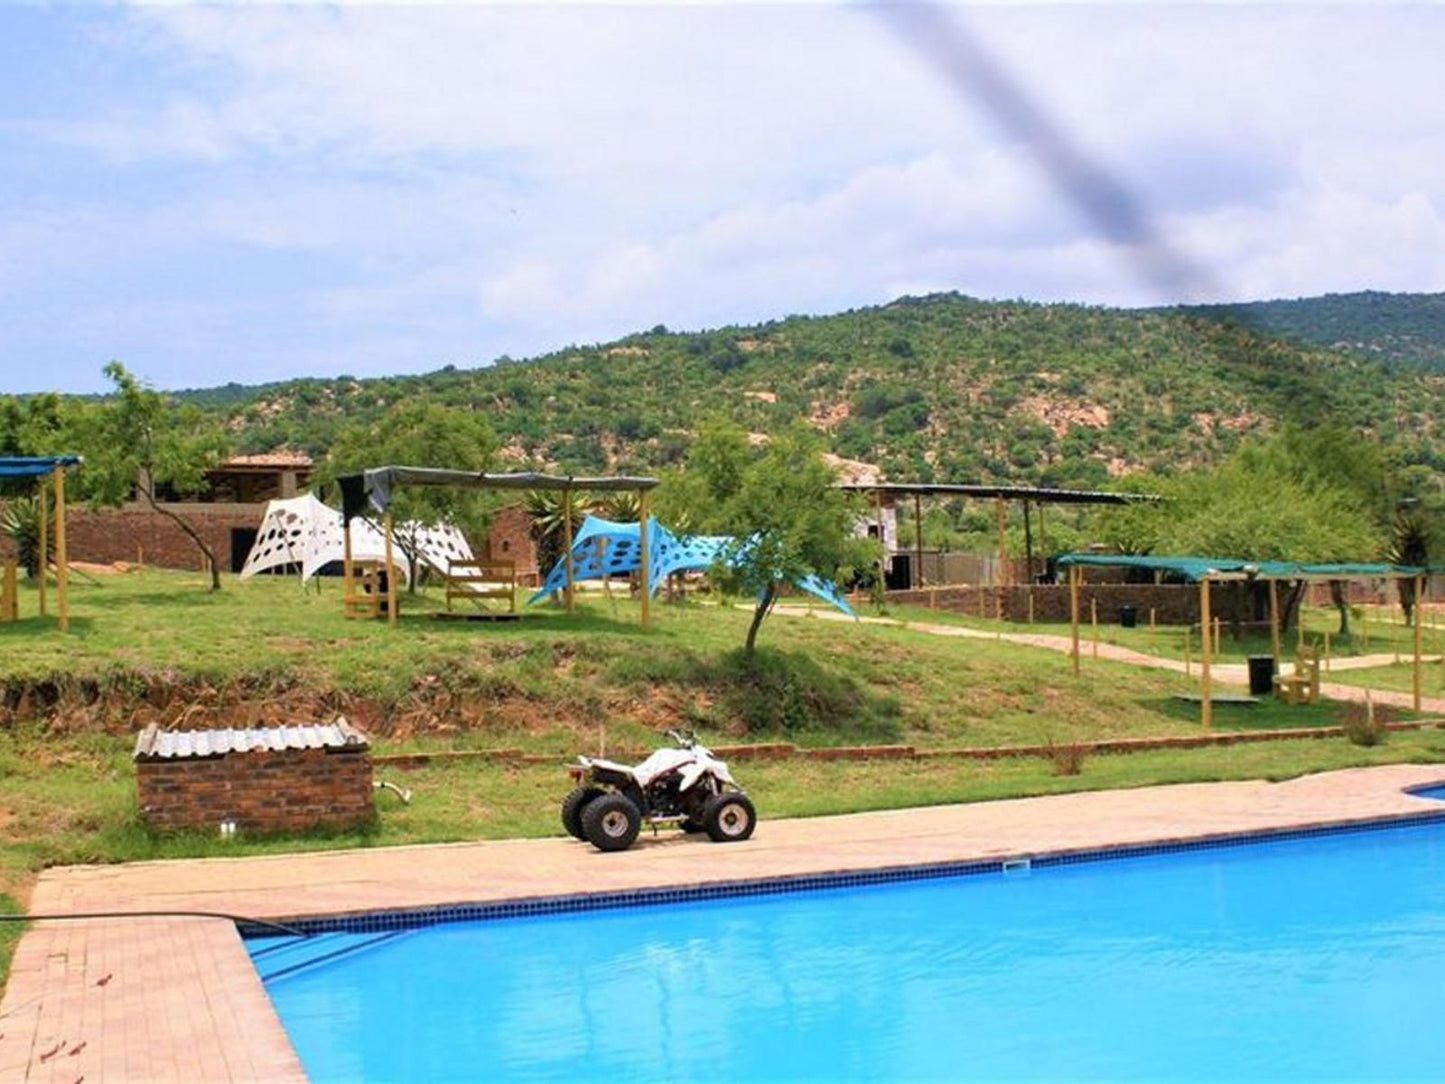 Tshinakie Family Resort Makgeng Haenertsburg Limpopo Province South Africa Complementary Colors, Swimming Pool